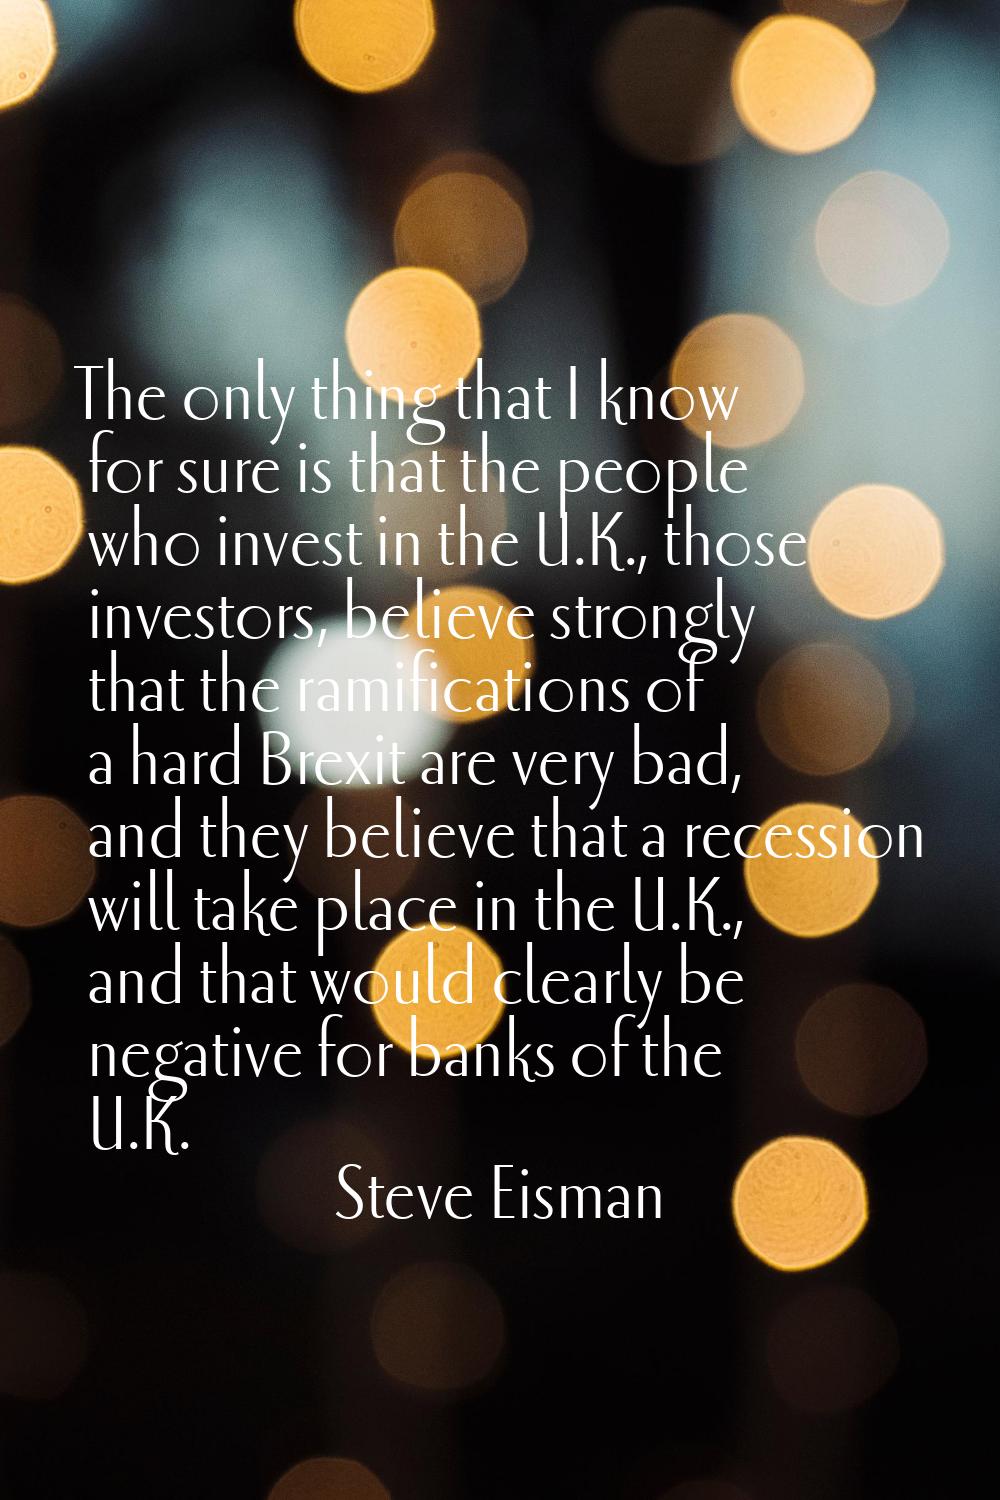 The only thing that I know for sure is that the people who invest in the U.K., those investors, bel